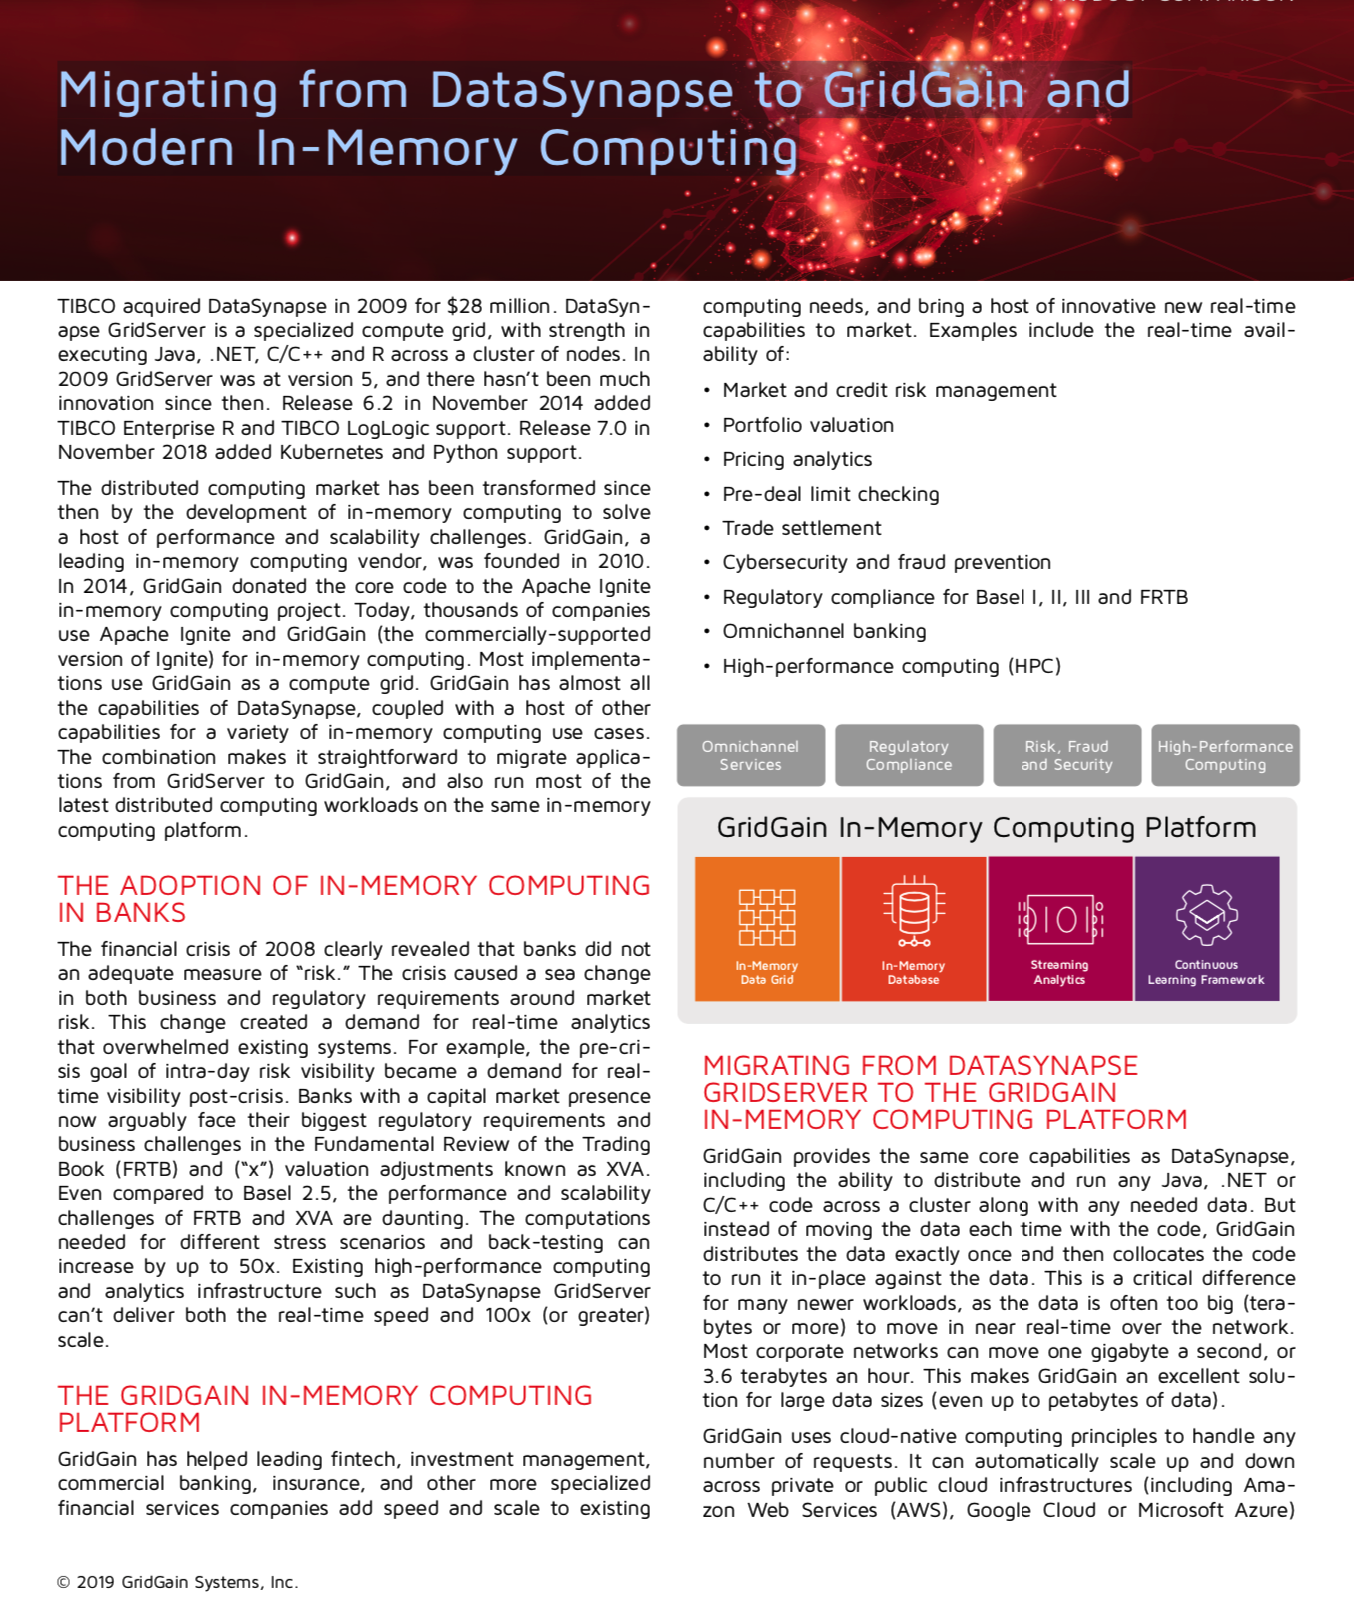 Migrating from DataSynapse to GridGain and Modern In-Memory Computing